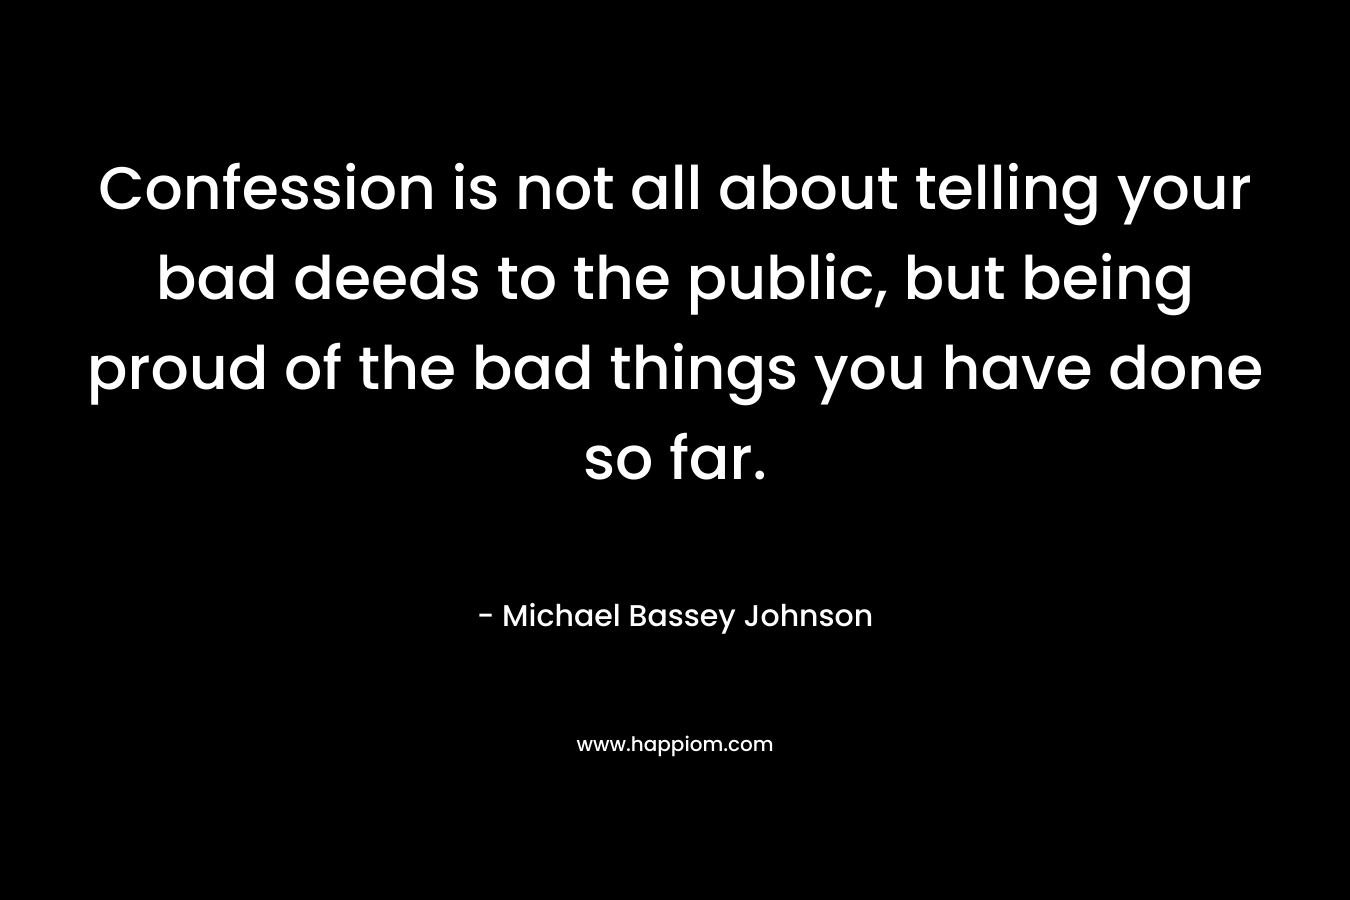 Confession is not all about telling your bad deeds to the public, but being proud of the bad things you have done so far.